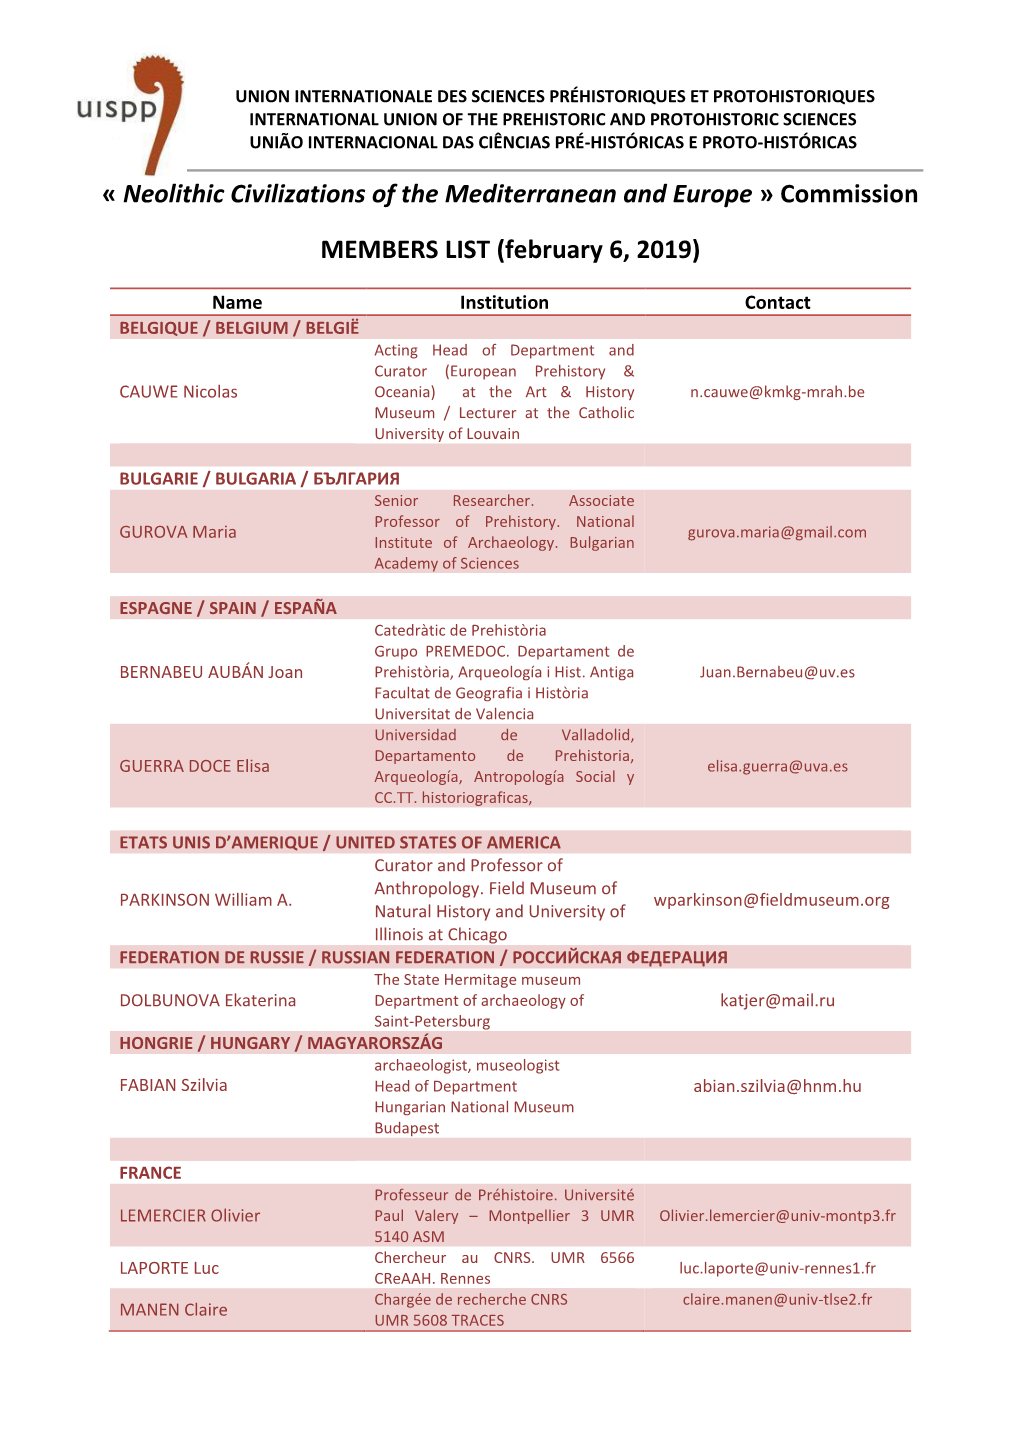 « Neolithic Civilizations of the Mediterranean and Europe » Commission MEMBERS LIST (February 6, 2019)